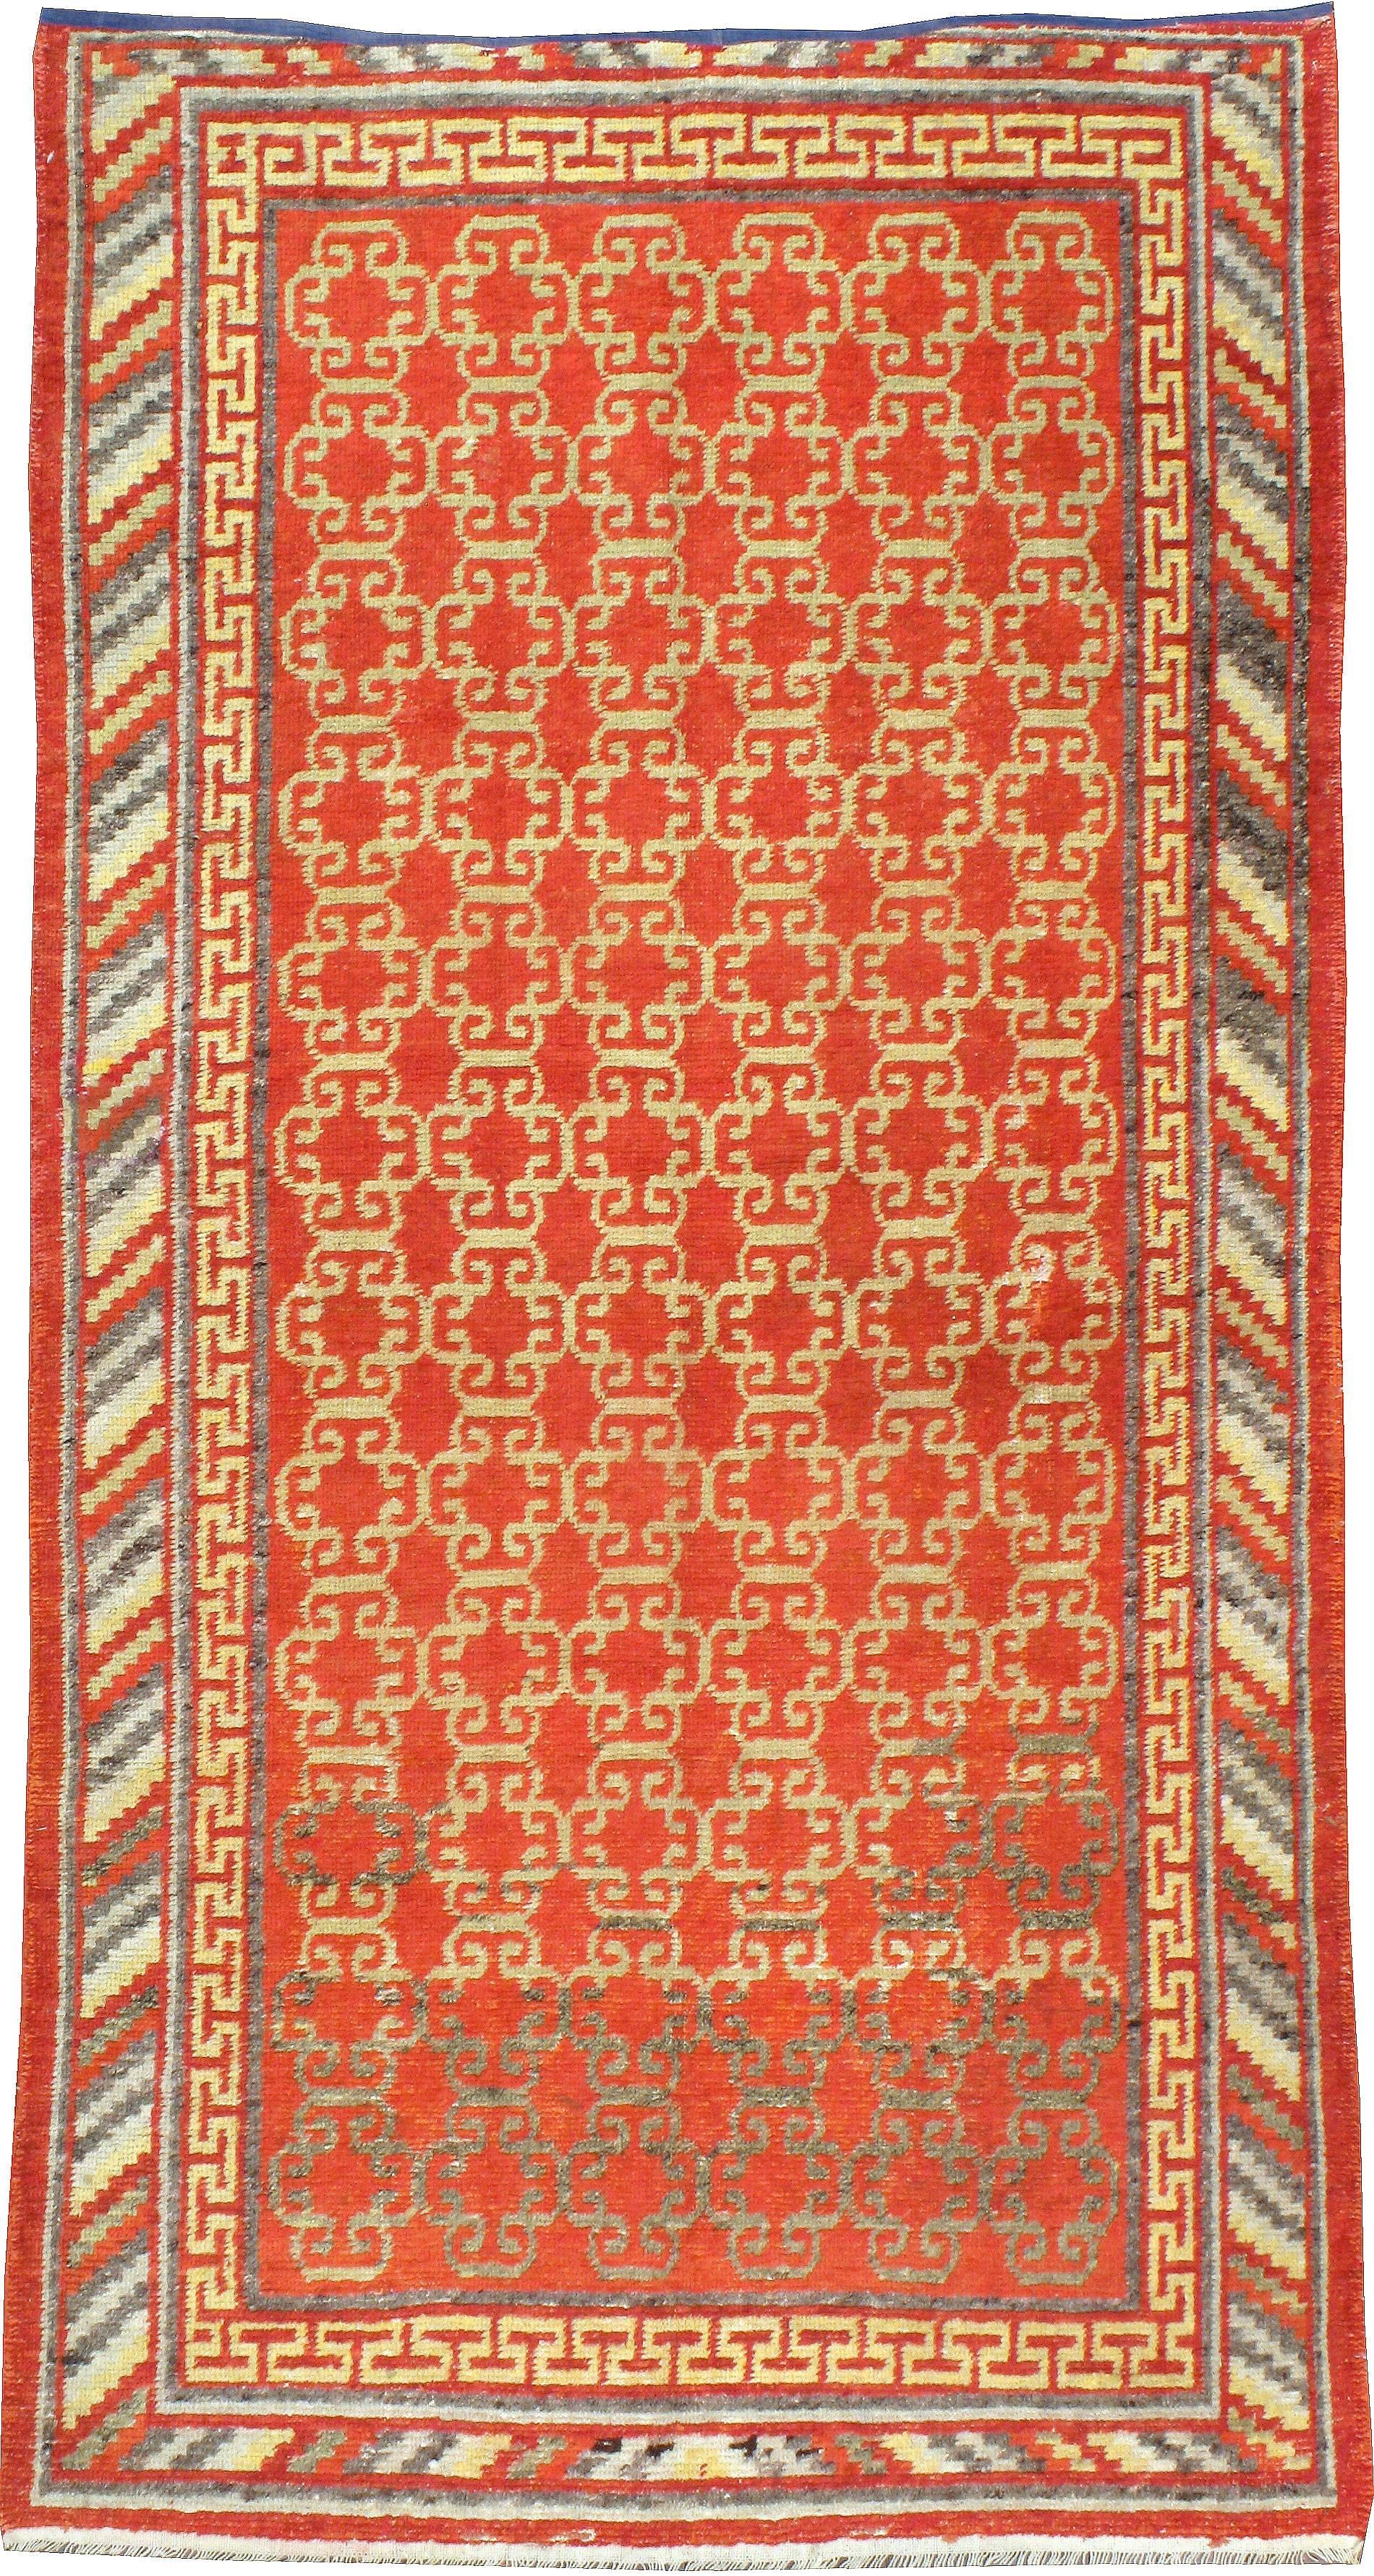 An antique East Turkestan Khotan carpet from the turn of the 20th century.